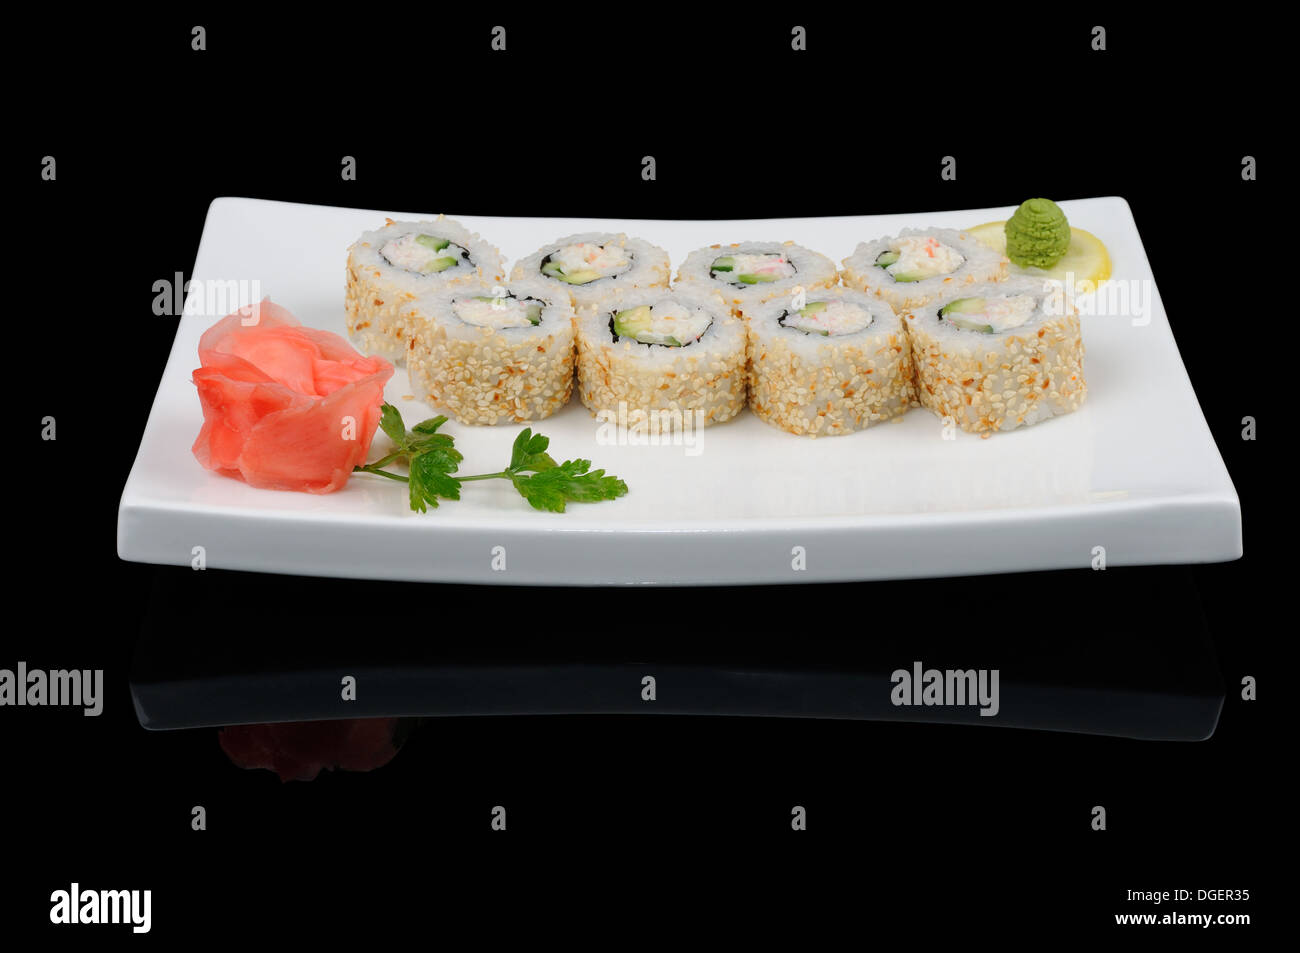 Delicious japanese cuisine. Seafood rolls on the plate Stock Photo